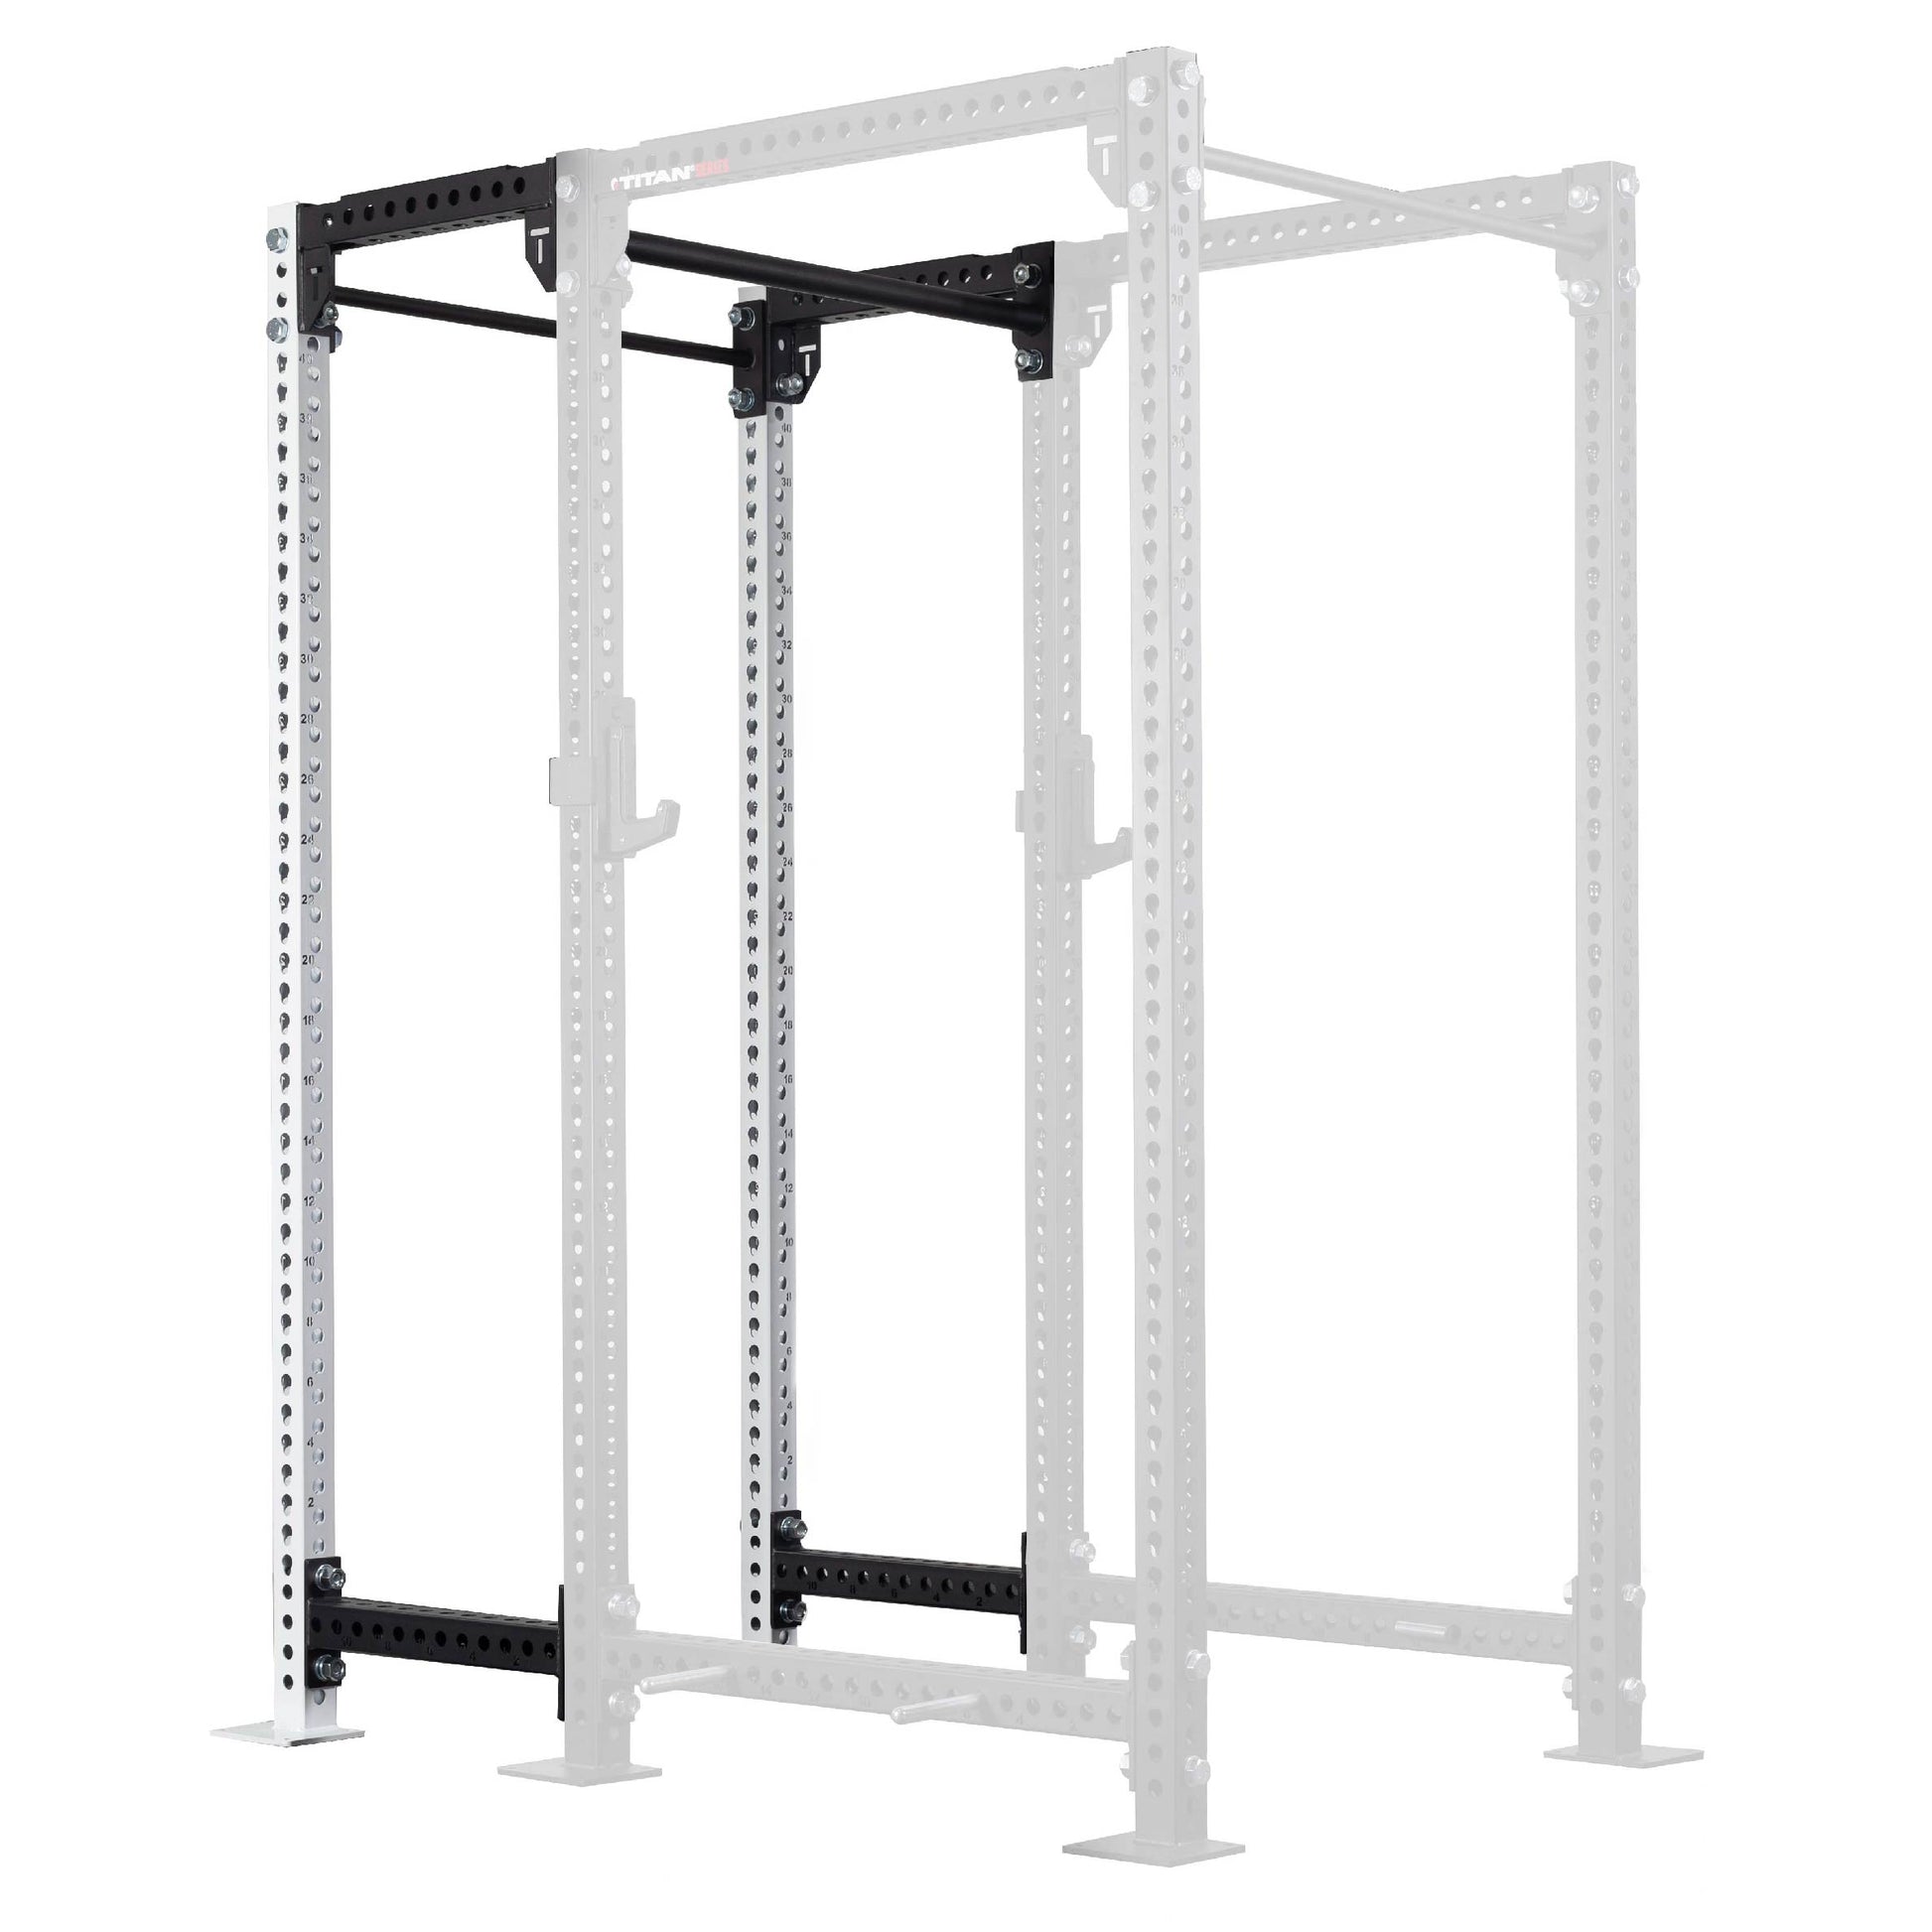 TITAN Series 24" Extension Kit - Extension Color: White - Extension Height: 100" - Crossmember: 1.25" Pull-Up Bar | White / 100" / 1.25" Pull-Up Bar